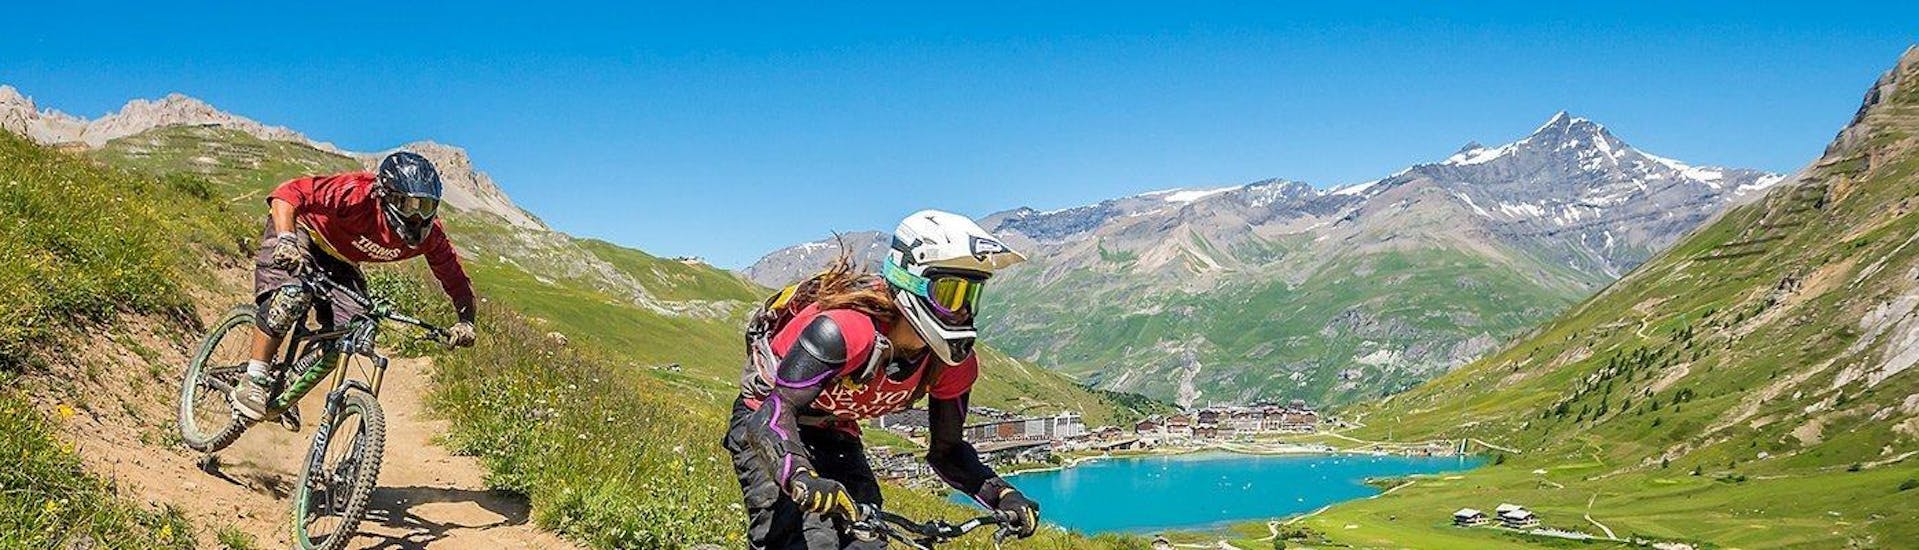 Private MTB Instructor in Haute-Tarentaise - All Levels.